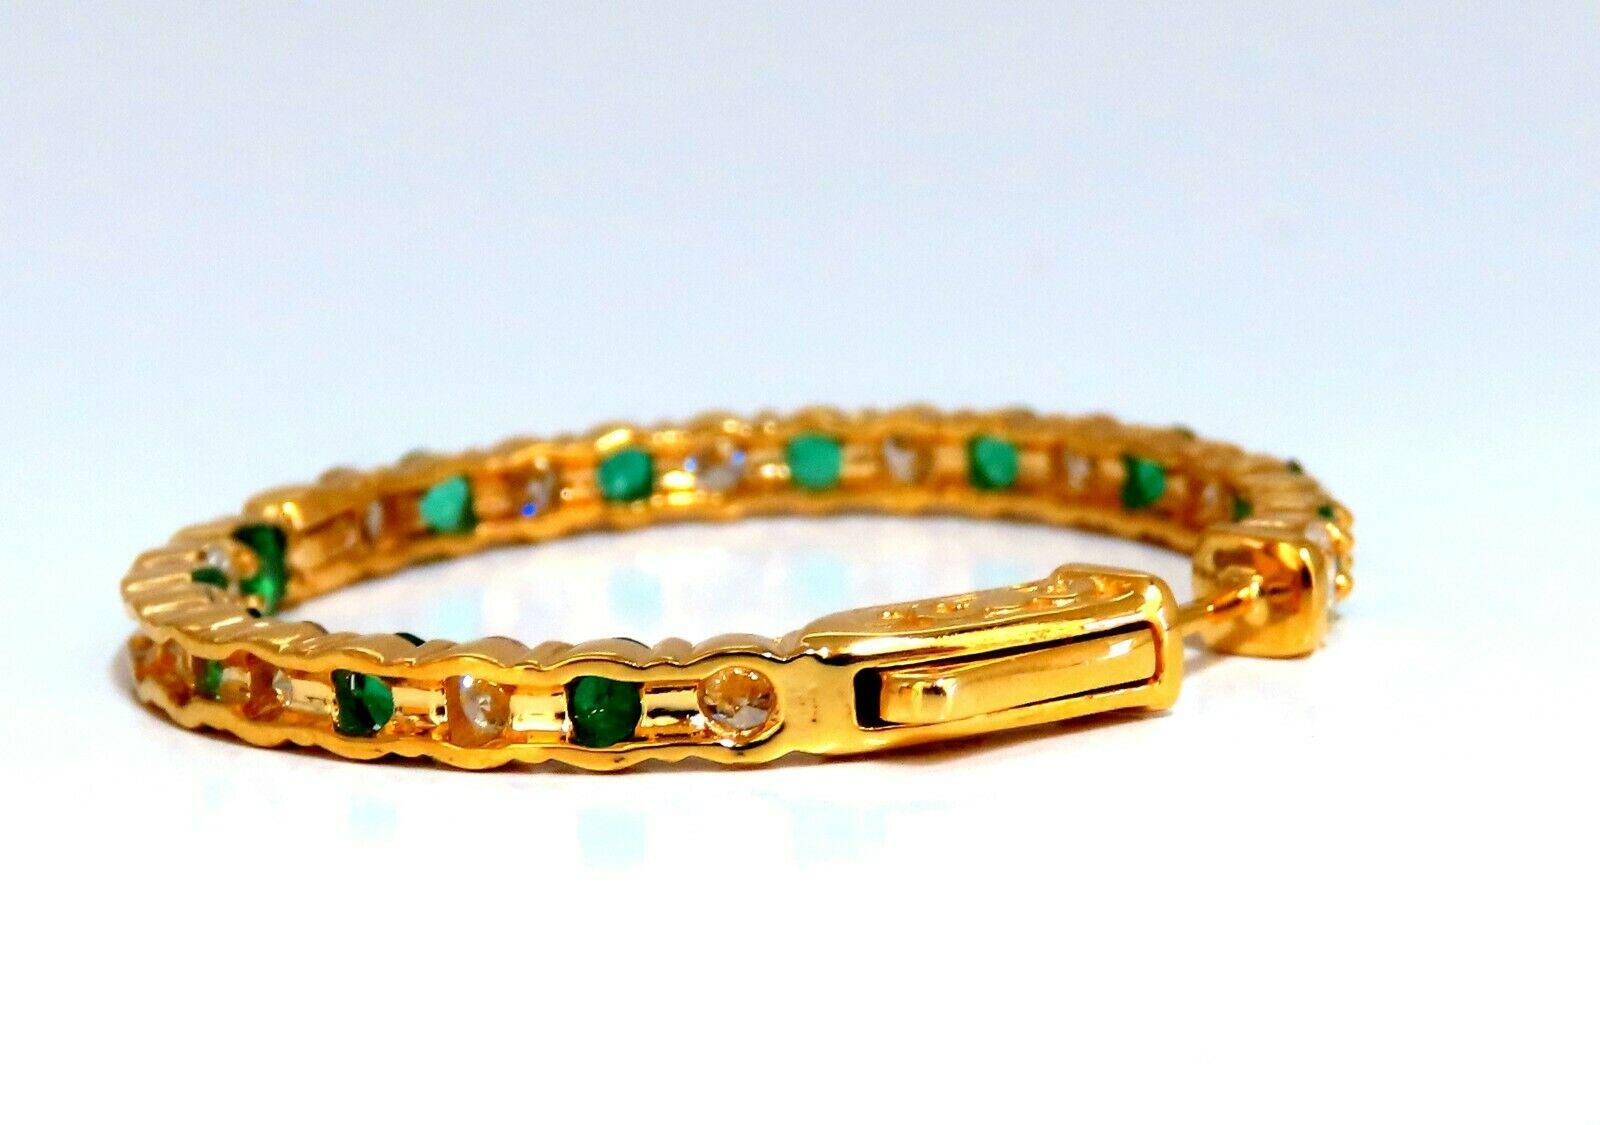 Women's or Men's 3.77ct Natural Emerald Diamonds Hoop Earrings 14kt Yellow Gold Inside Out For Sale